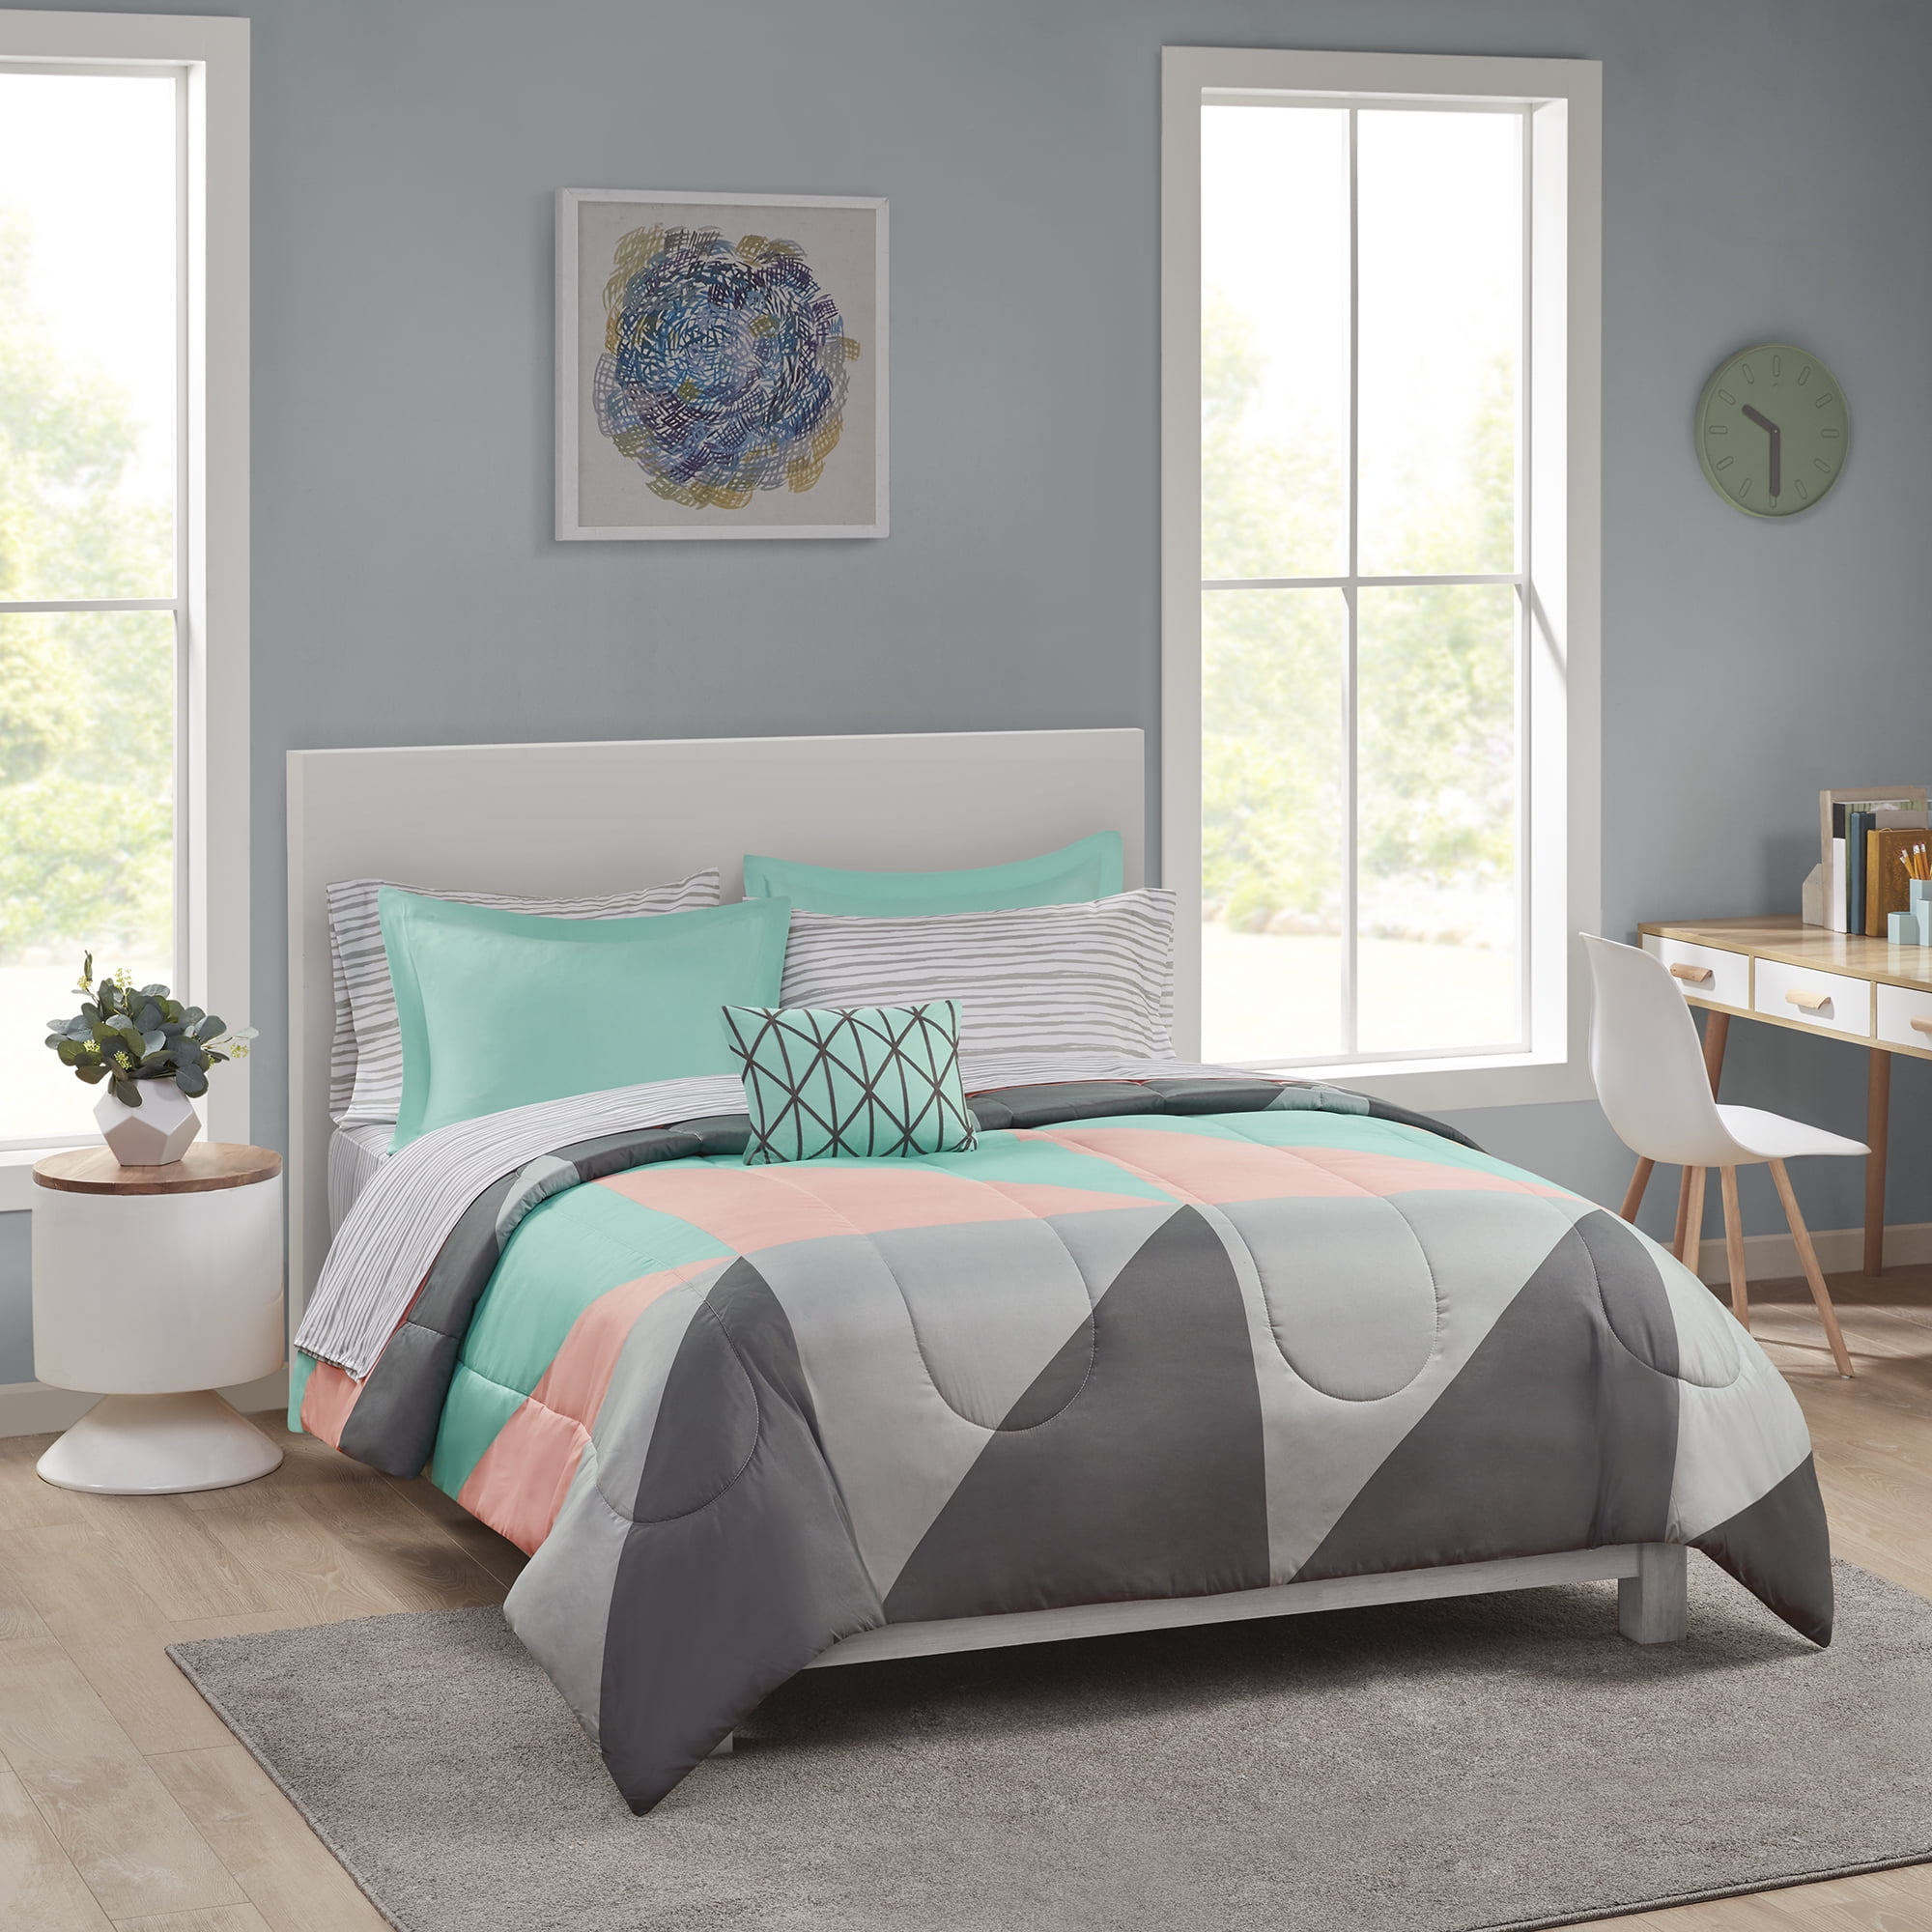 Mainstays Grey Teal 8 Pc Bed In A Bag, Teal Twin Bed Comforter